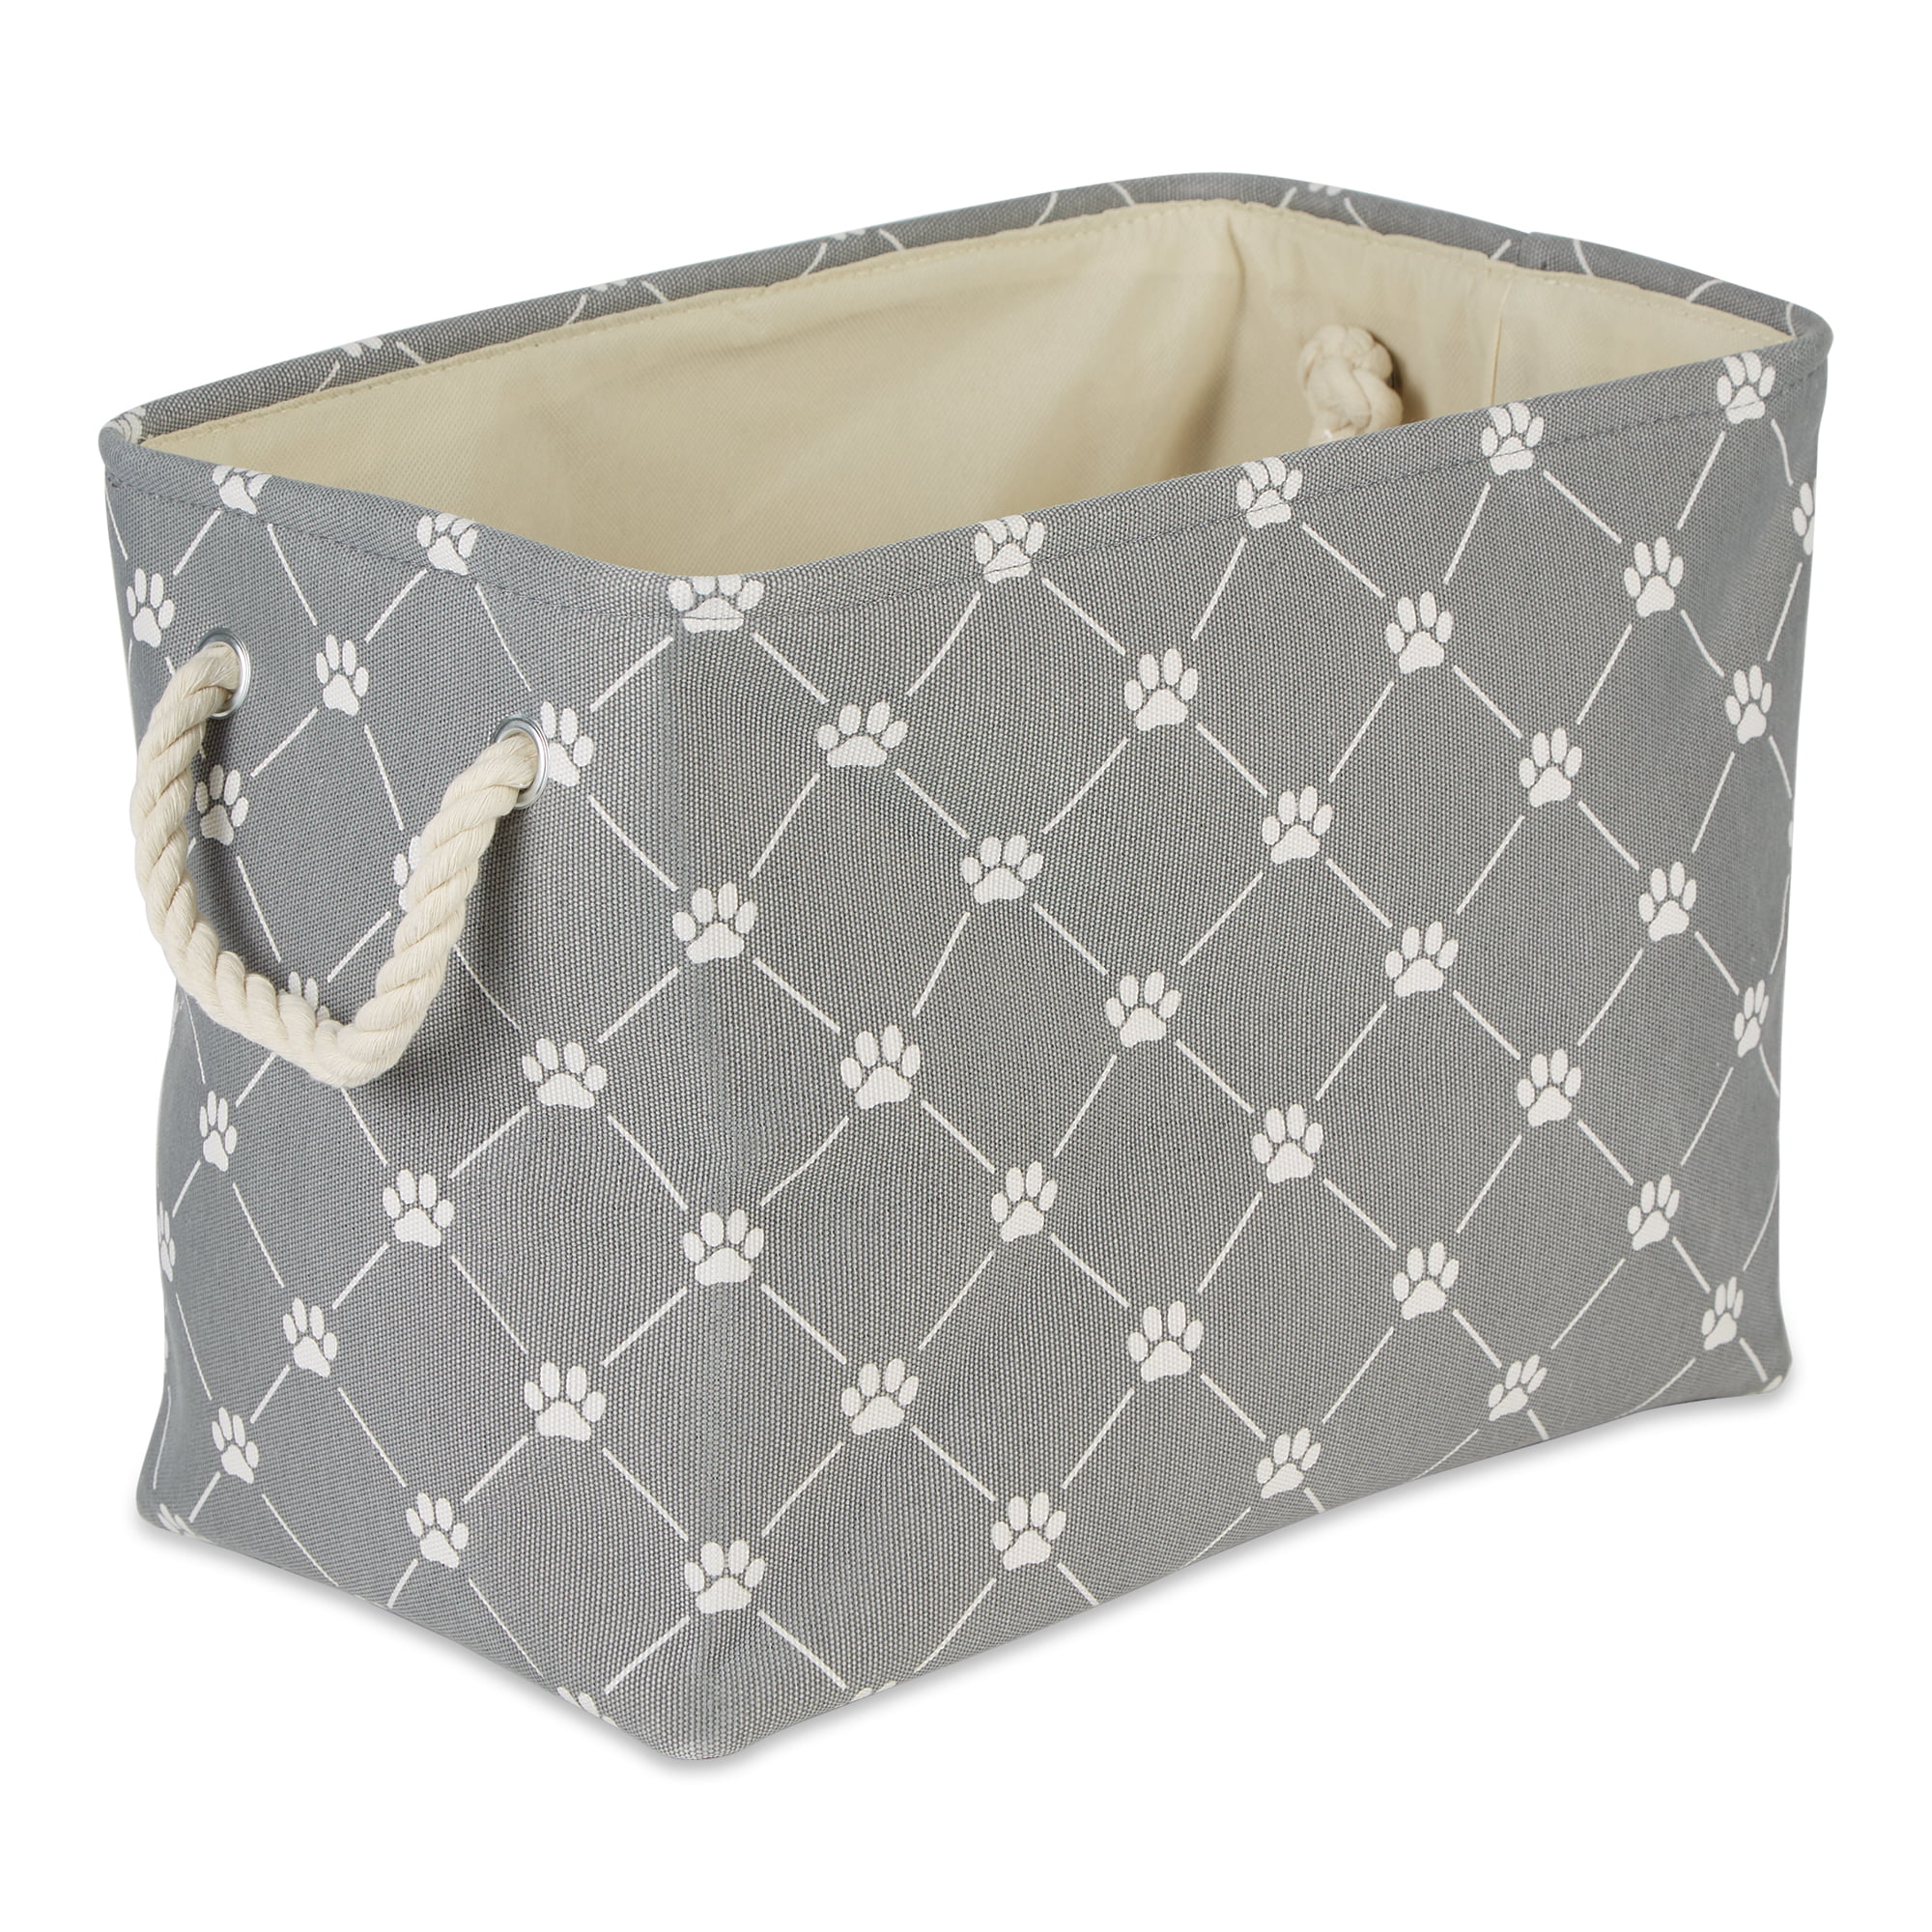 Picture of Design Imports CAMZ14206 Polyester Trellis Paw Rectangle Pet Bin, Gray